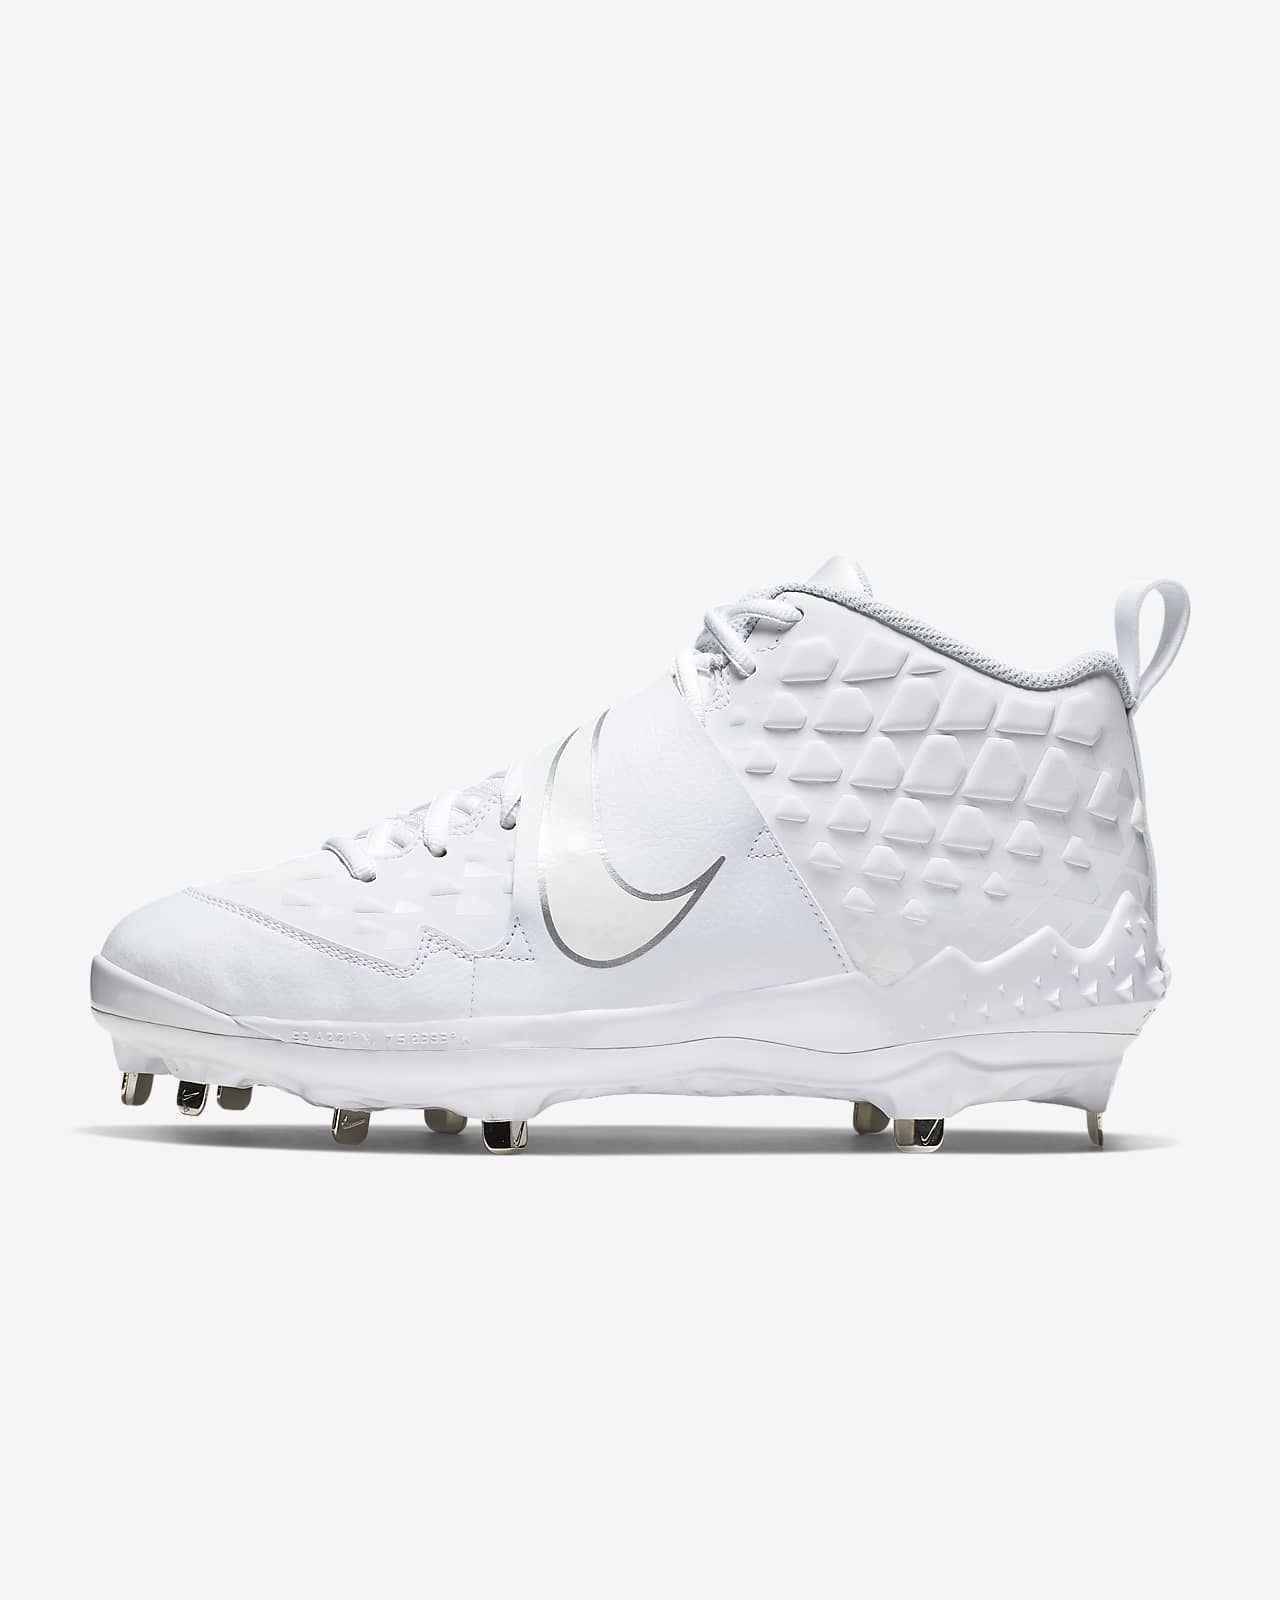 mike trout men's molded cleats